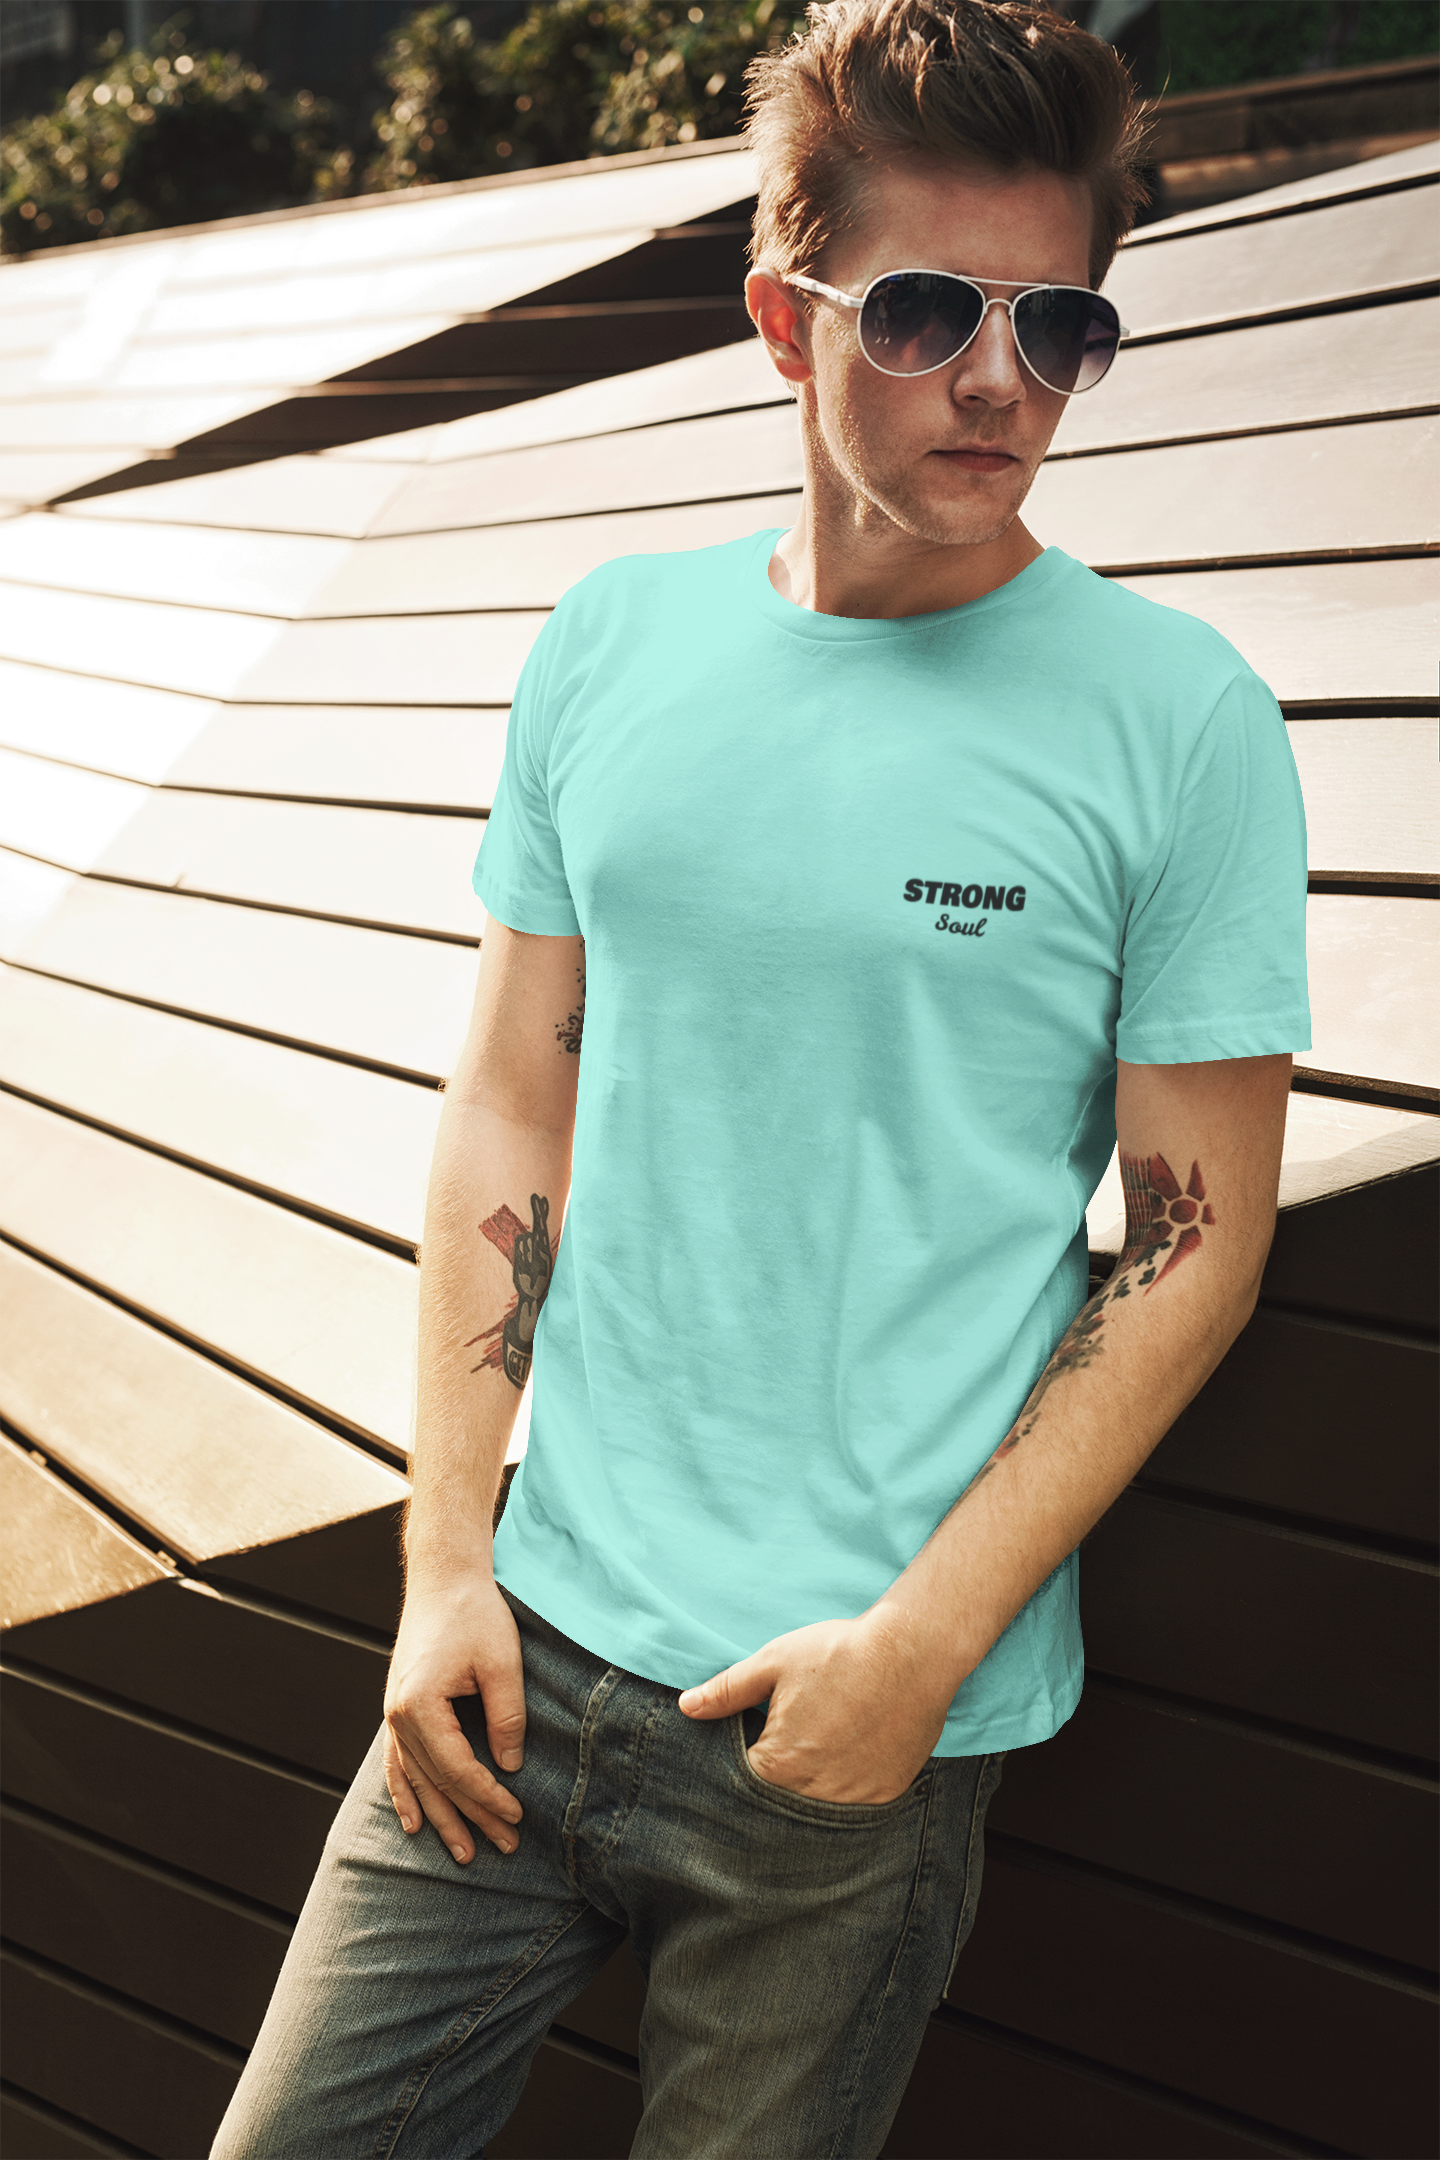 Sea Green Solid - Gym T Shirt Strong Soul Shirts & Tops